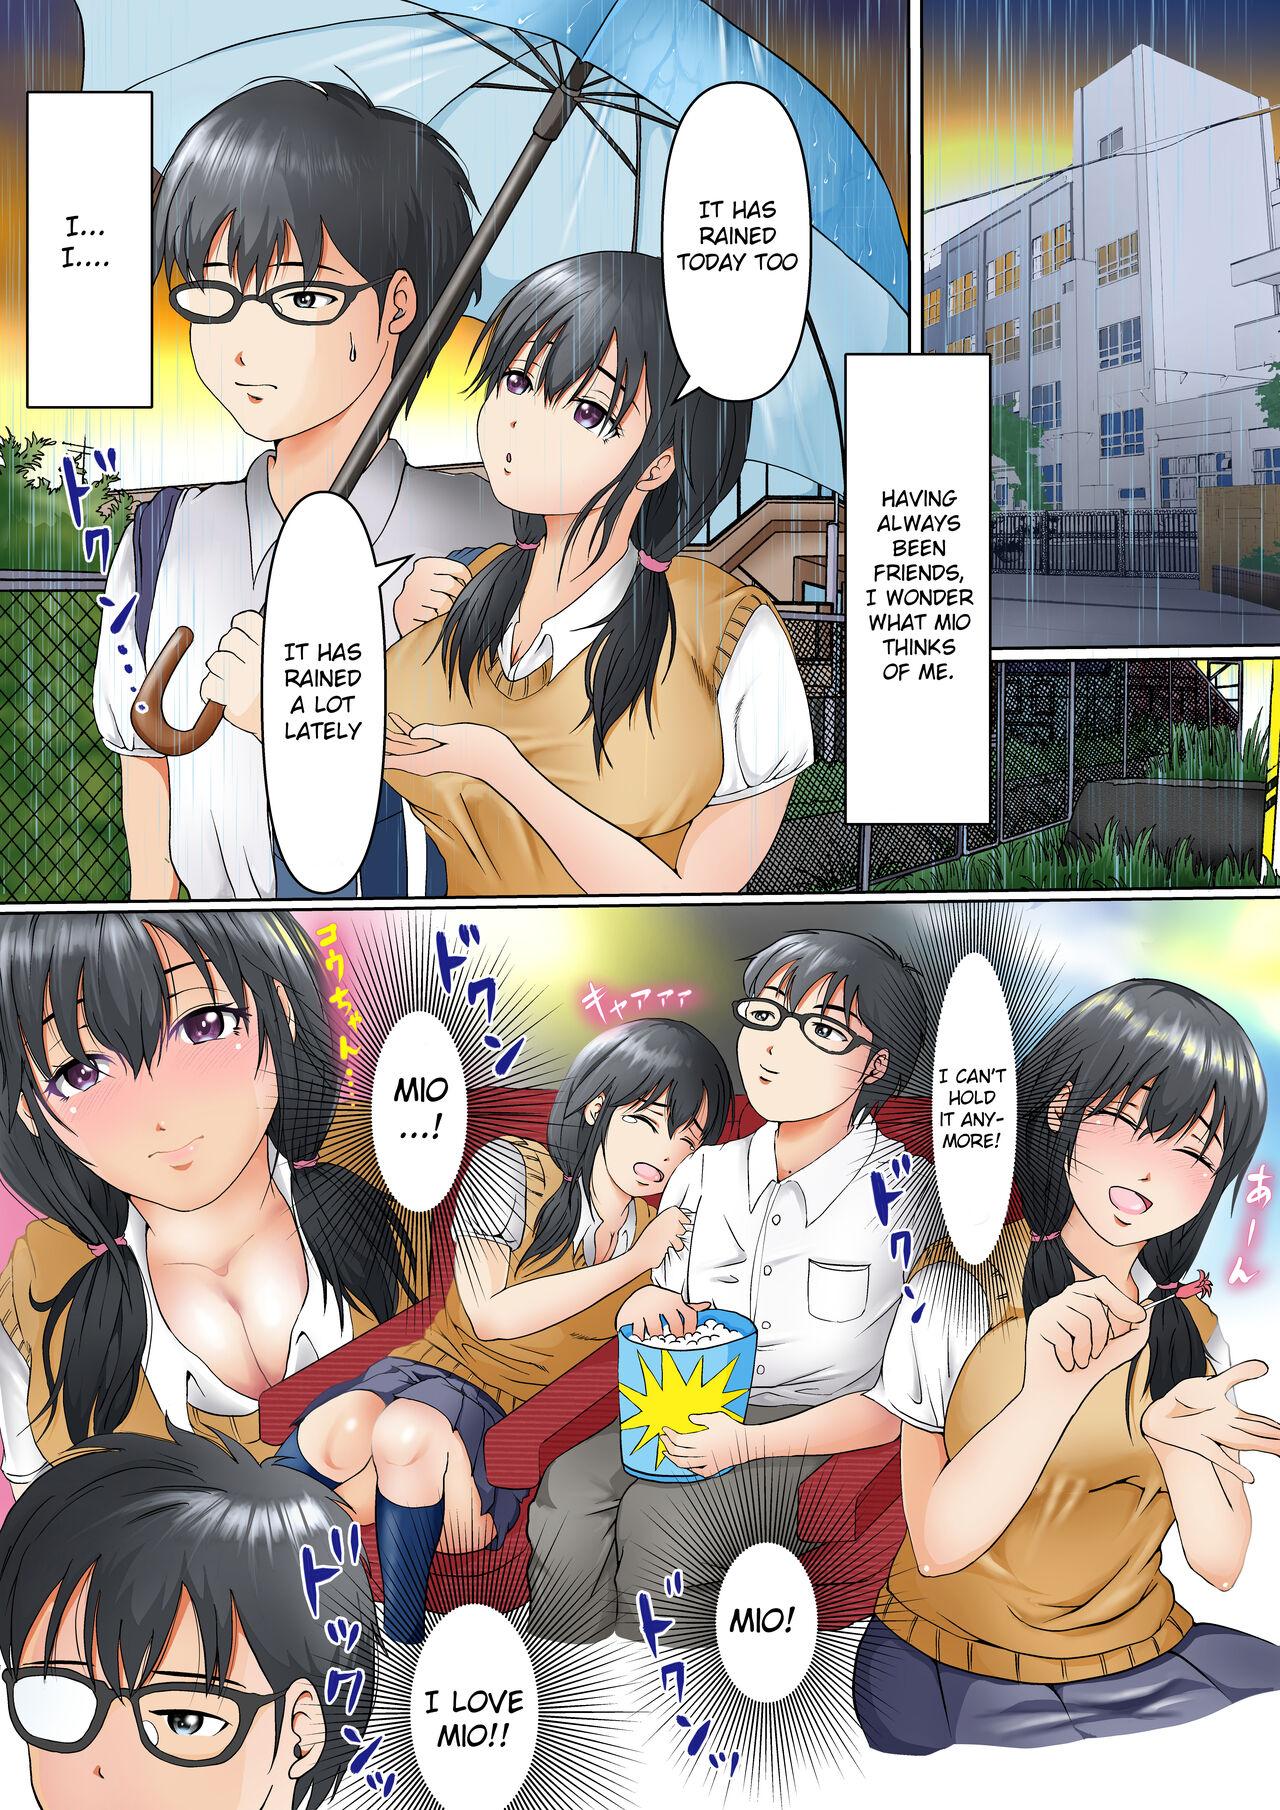 Yanks Featured The reason why the bond with my childhood friend is broken so easily - Original Tanned - Page 11